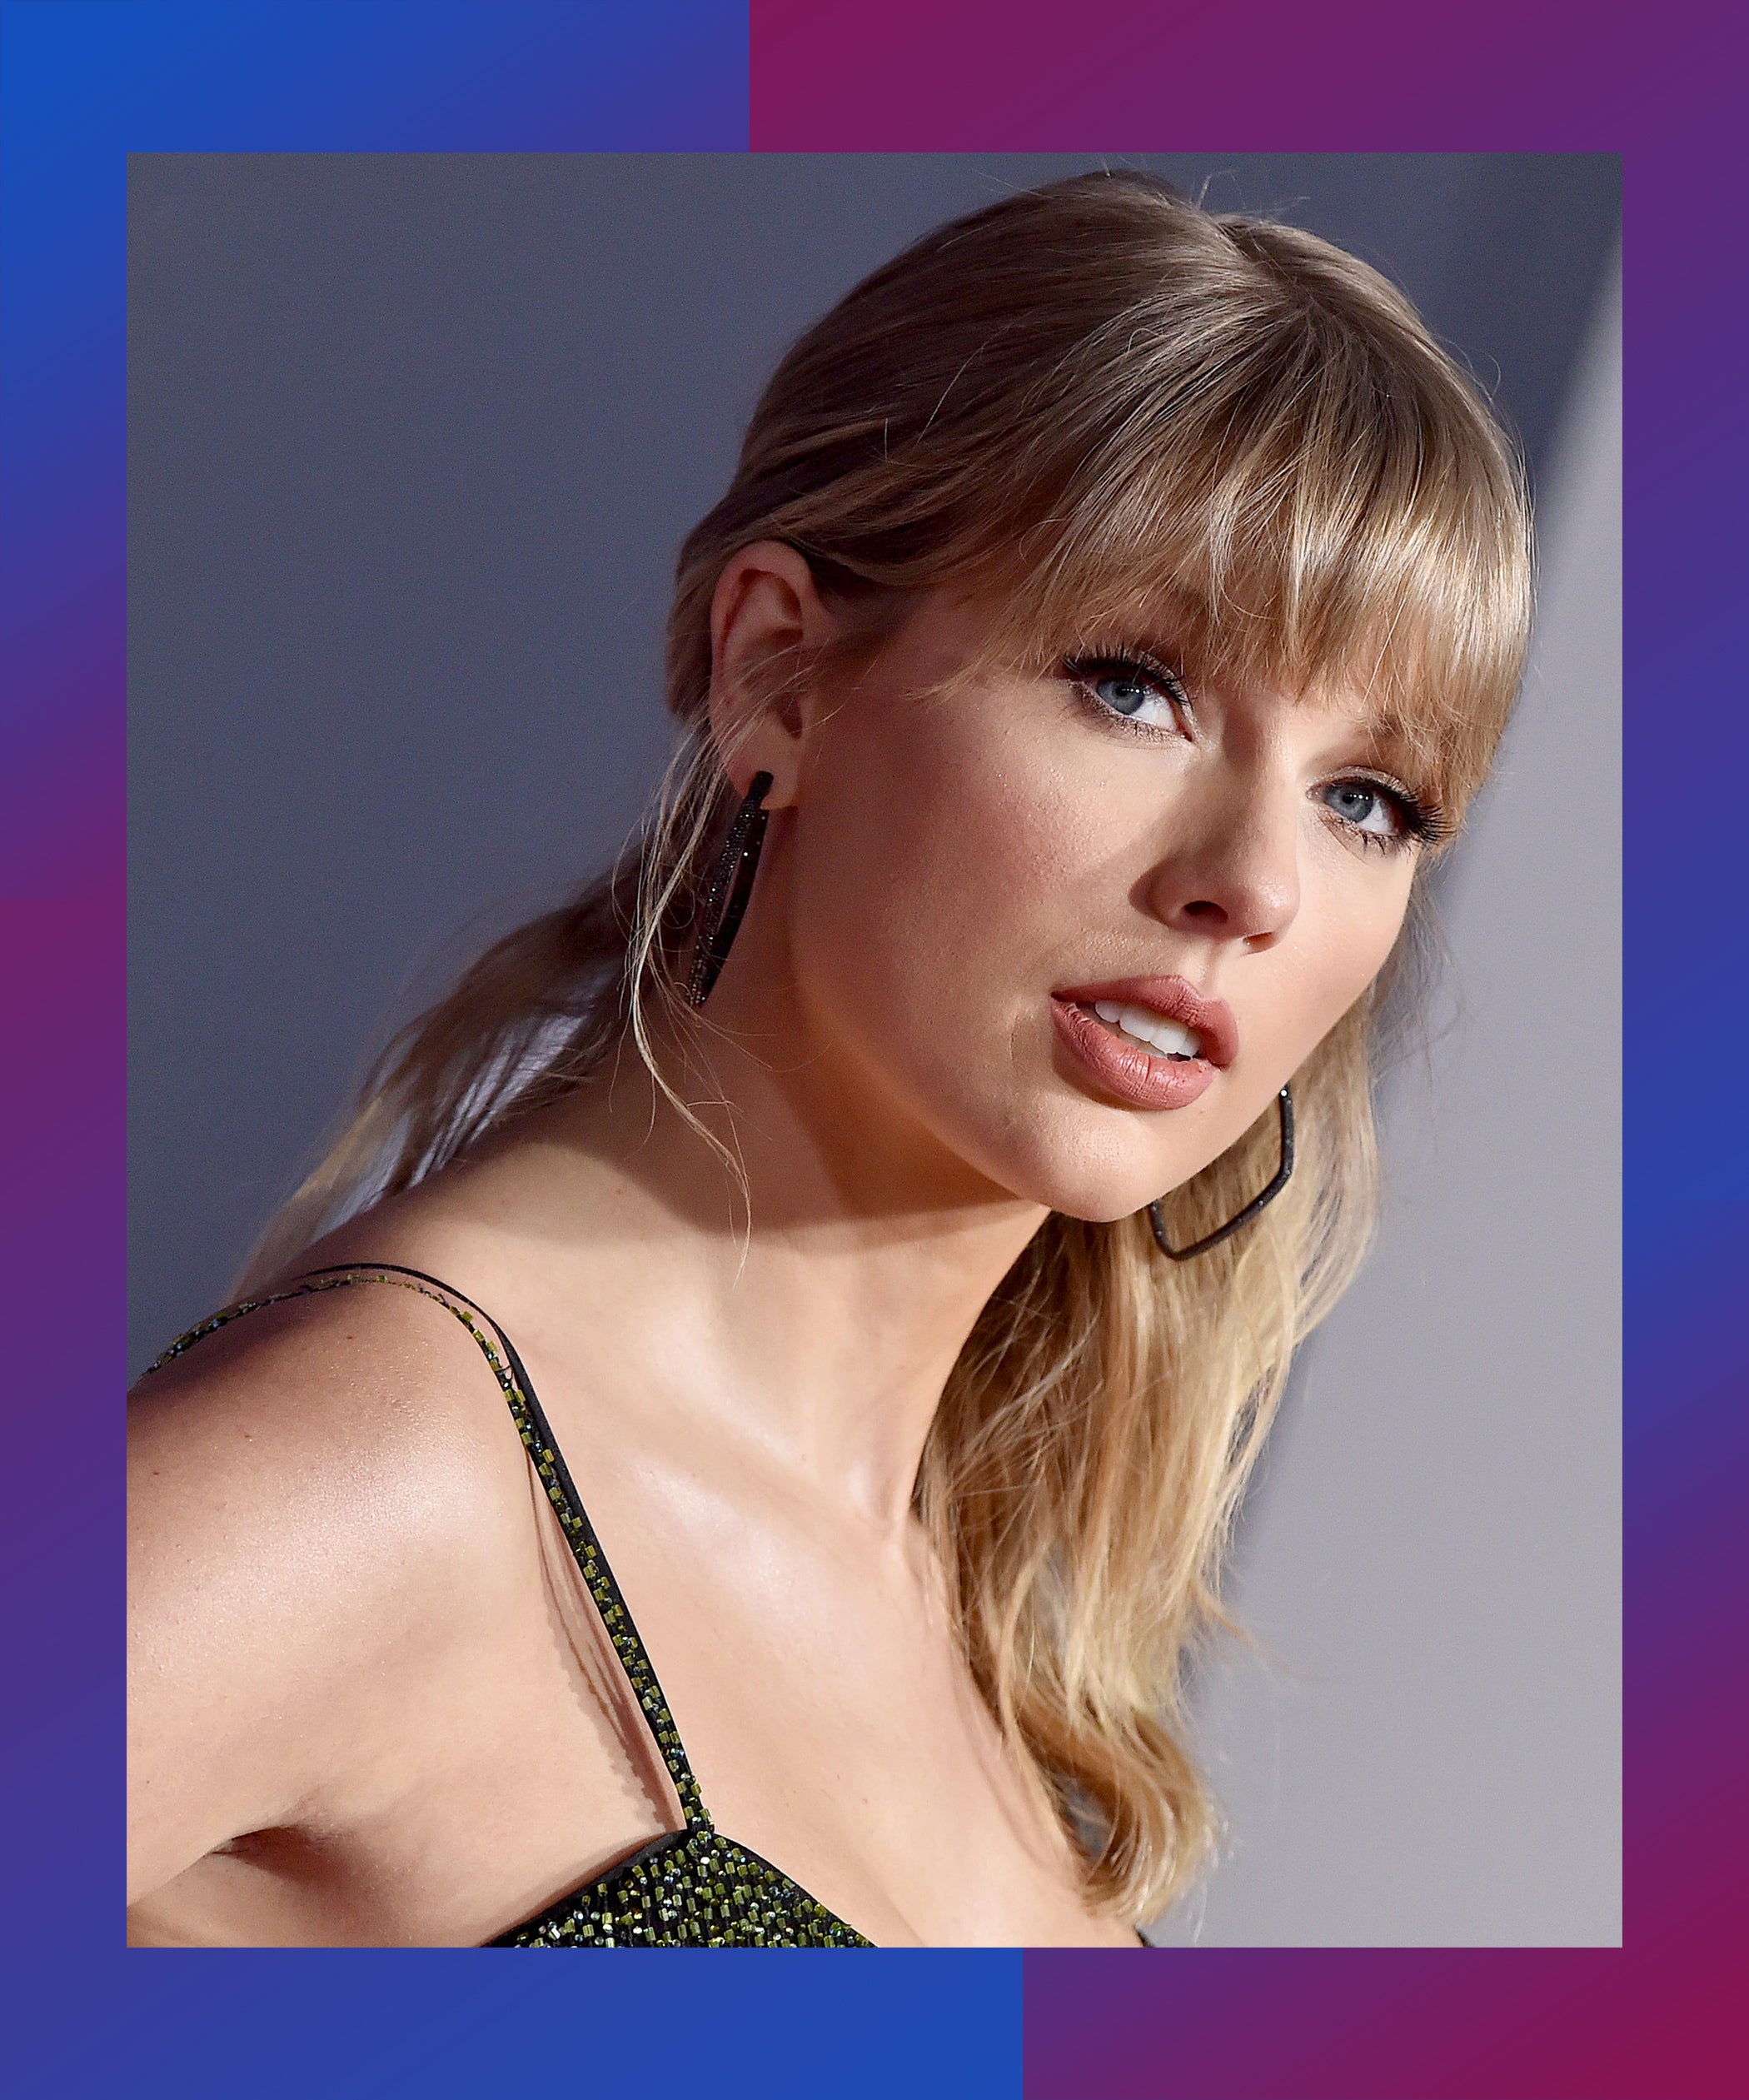 Taylor Swift Opens Up About Struggle With Eating Disorder (EXCLUSIVE)